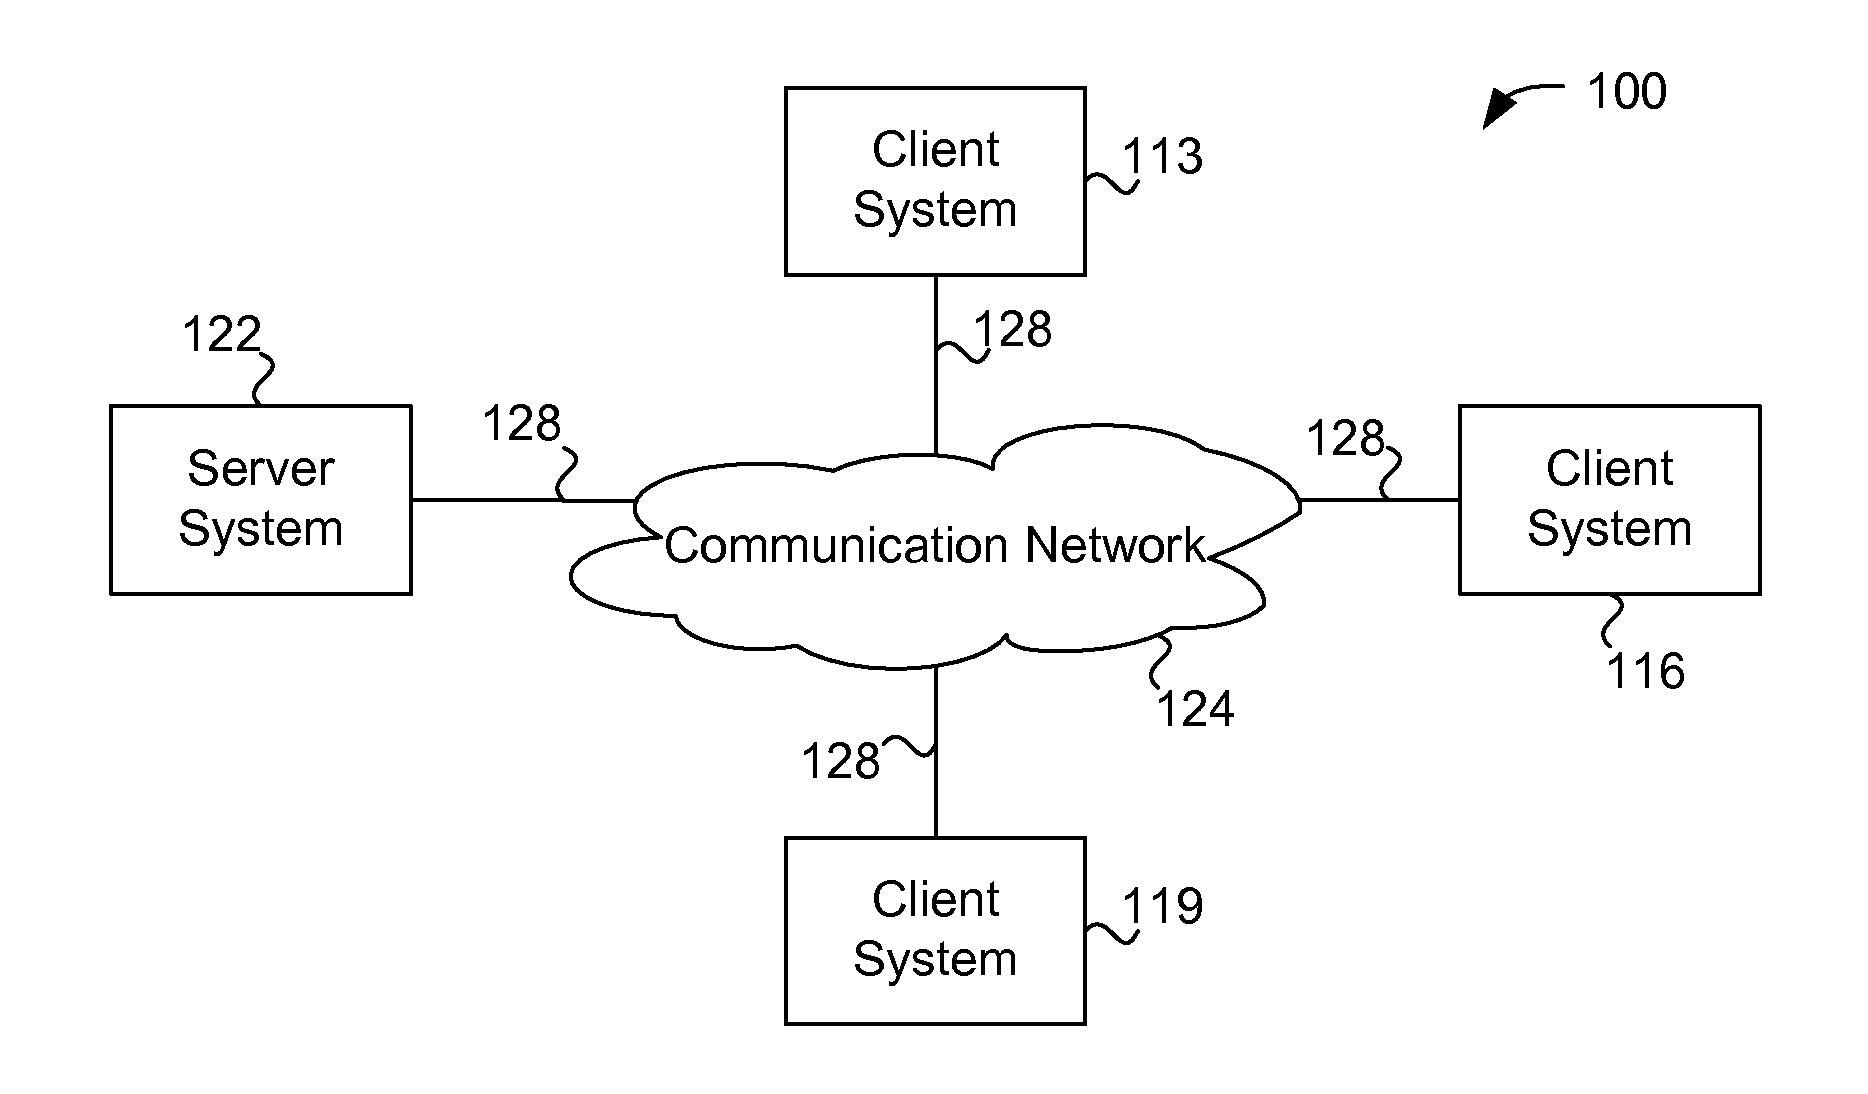 Techniques and System to Monitor and Log Access of Information Based on System and User Context Using Policies